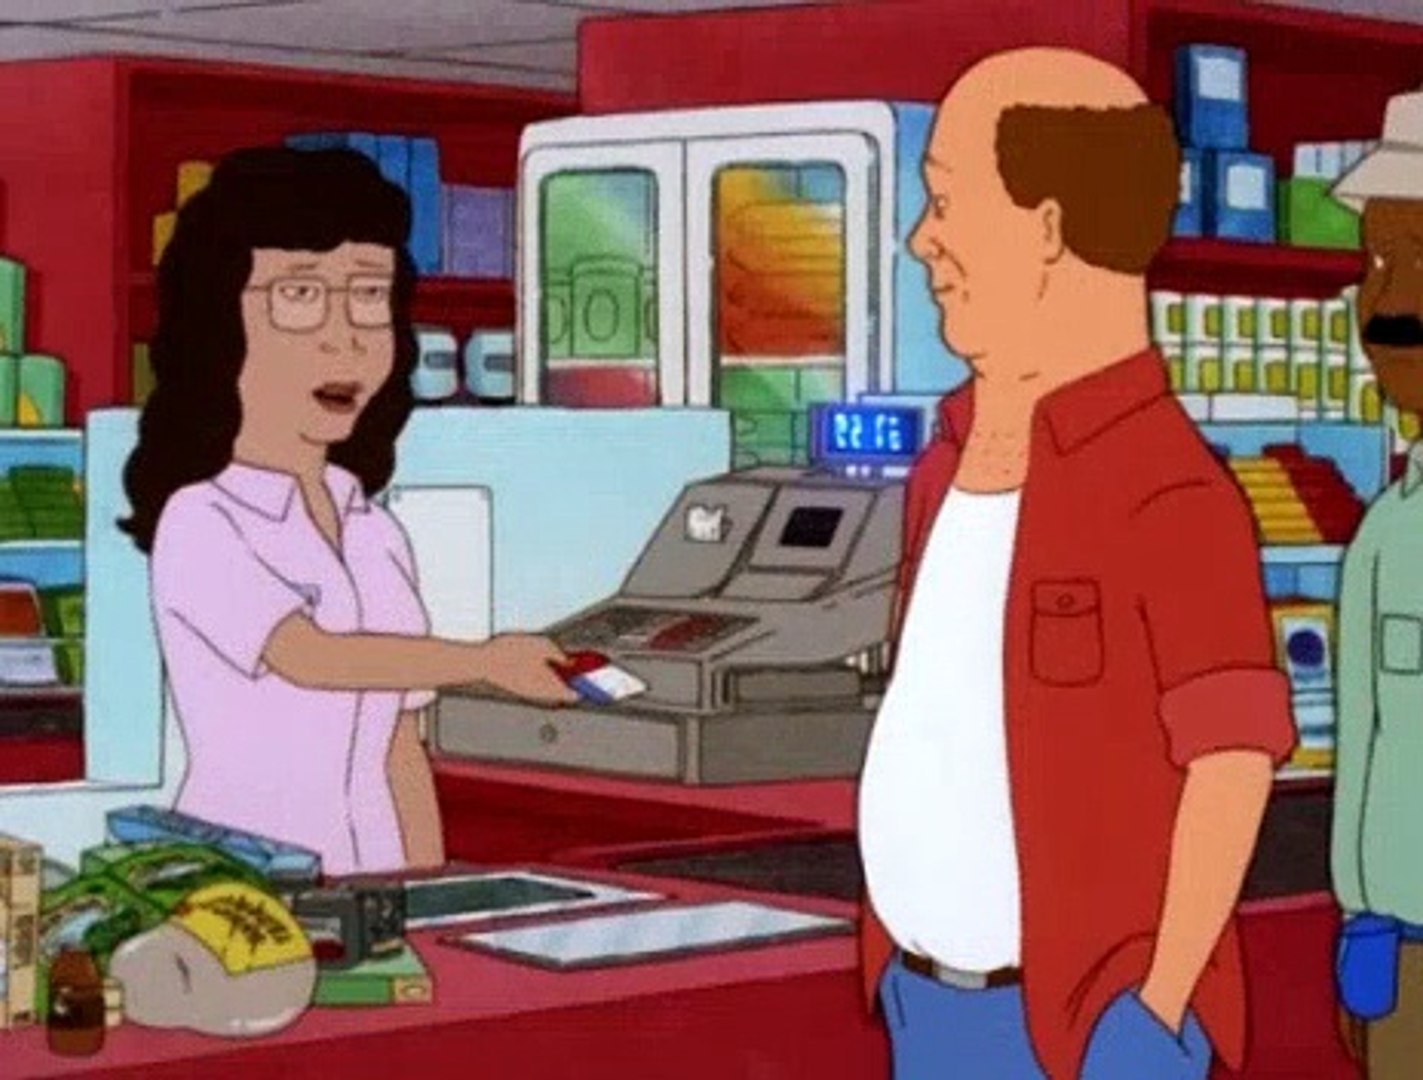 King of the Hill S07E04 - Goodbye Normal Jeans - video Dailymotion